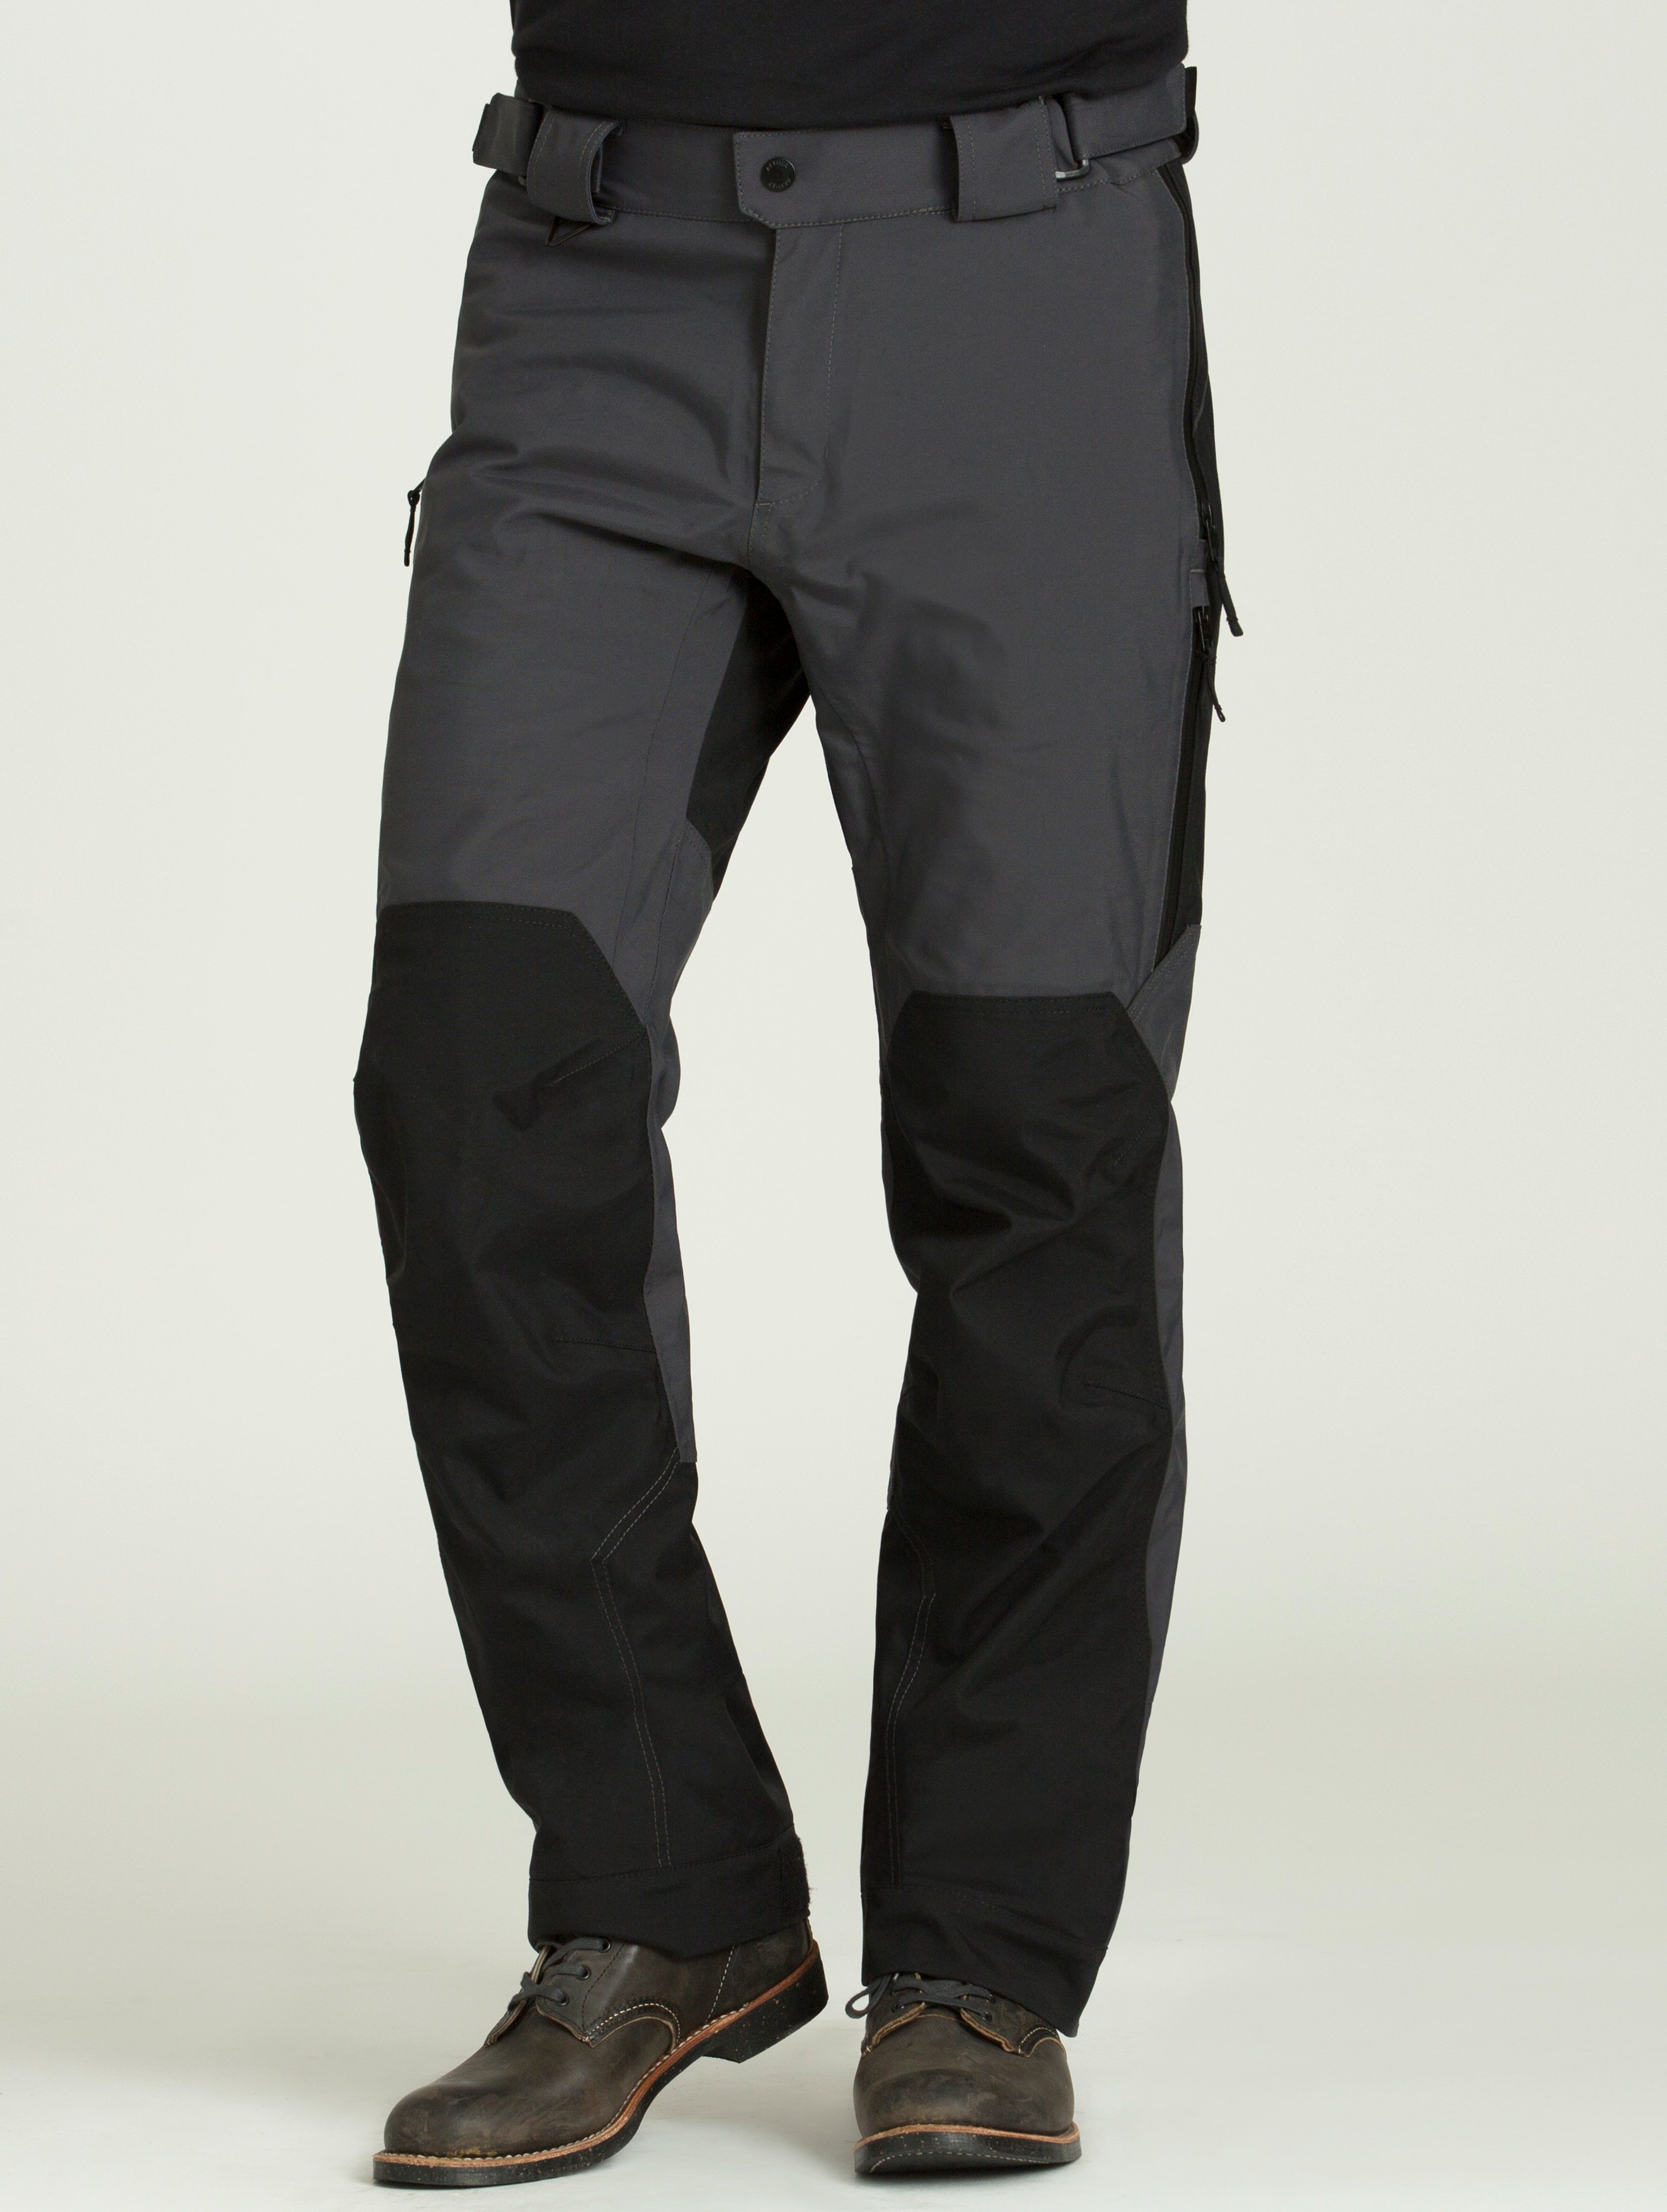 Expedition Motorcycle Pant - Graphite – Aether Apparel